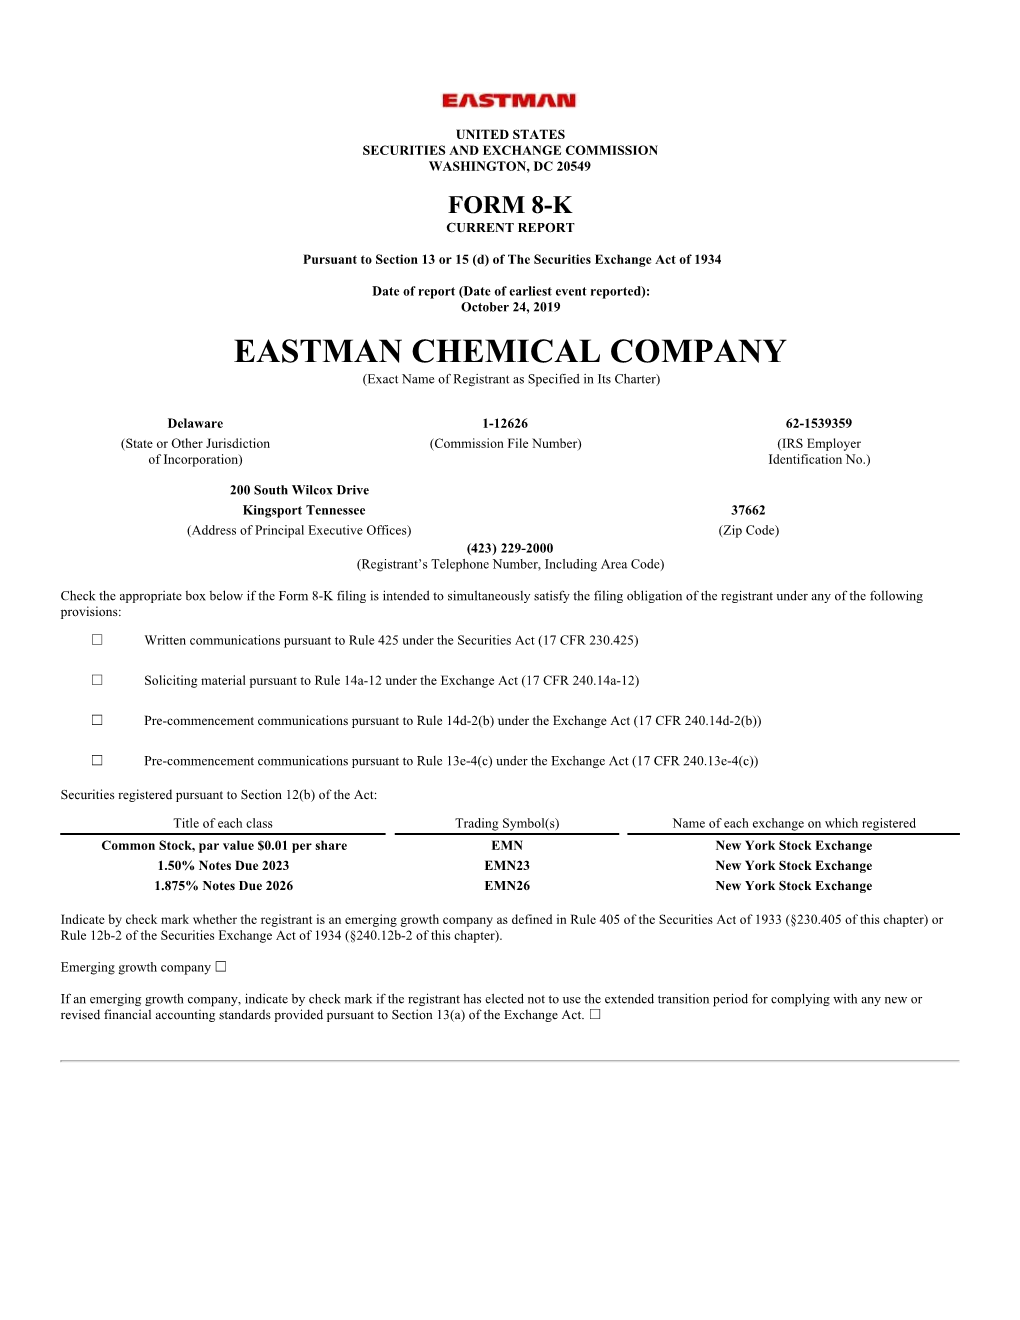 EASTMAN CHEMICAL COMPANY (Exact Name of Registrant As Specified in Its Charter)